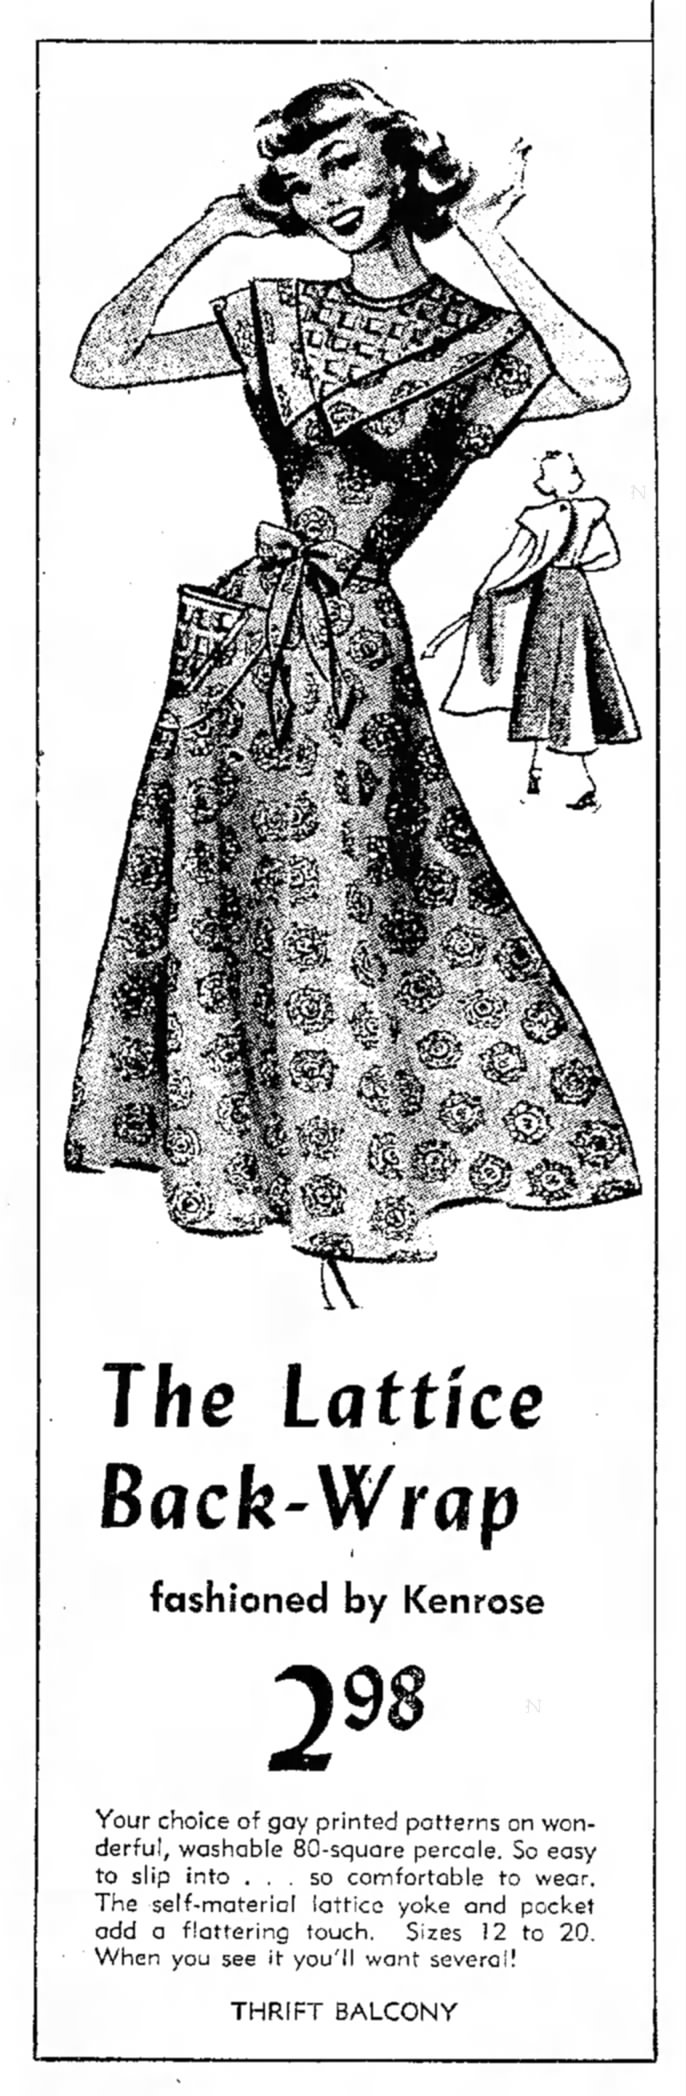 Fashioned by Kenrose ad from 8 March 1950 Cumberland, Md, Evening Times